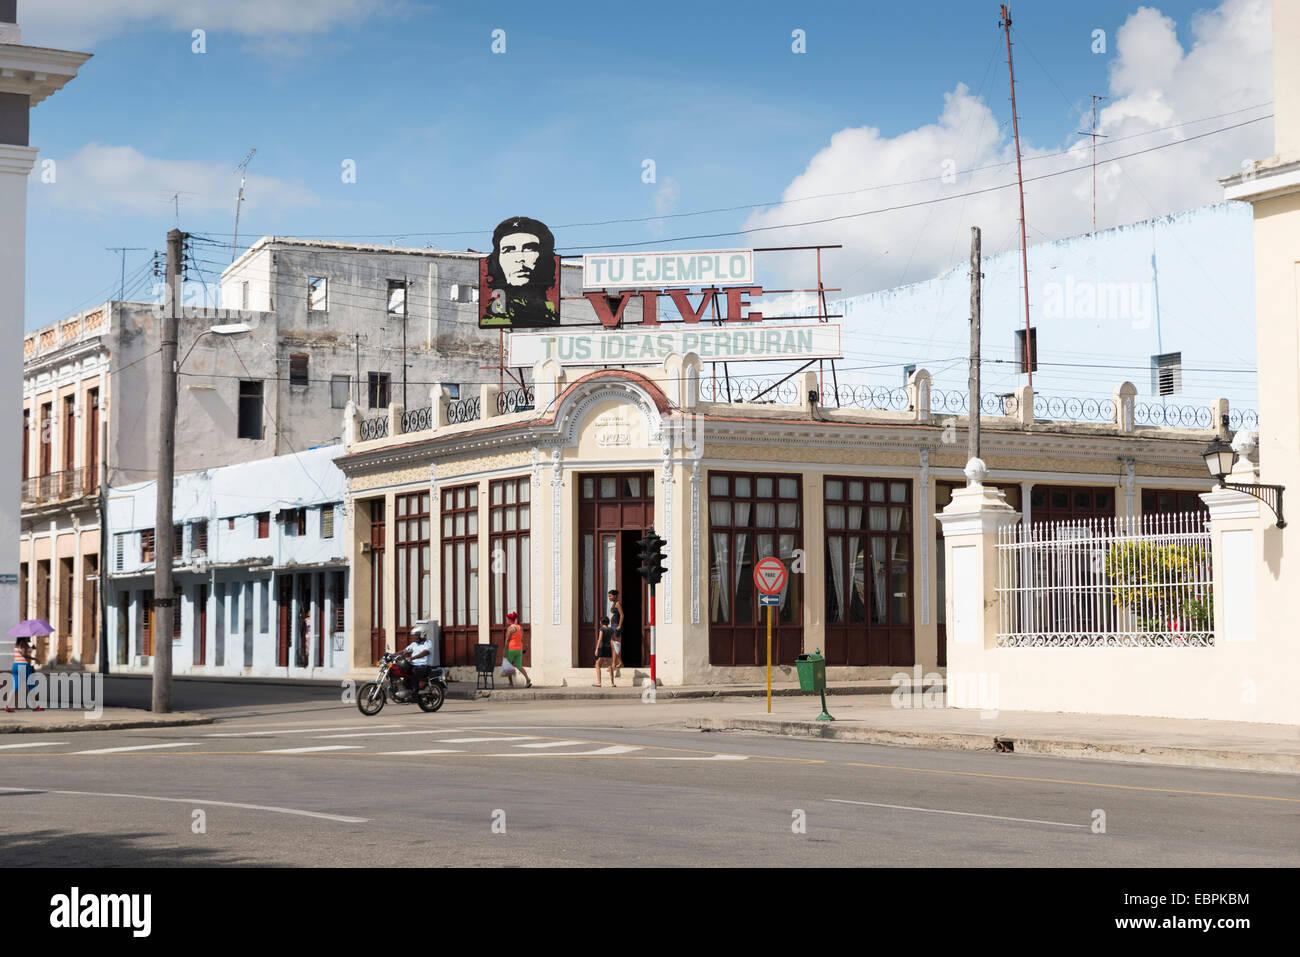 CIENFUEGOS, CUBA - MAY 7, 2009. A house with a Che Guevara sign on the top, in Cienfuegos, Cuba, on May 7, 2014 Stock Photo